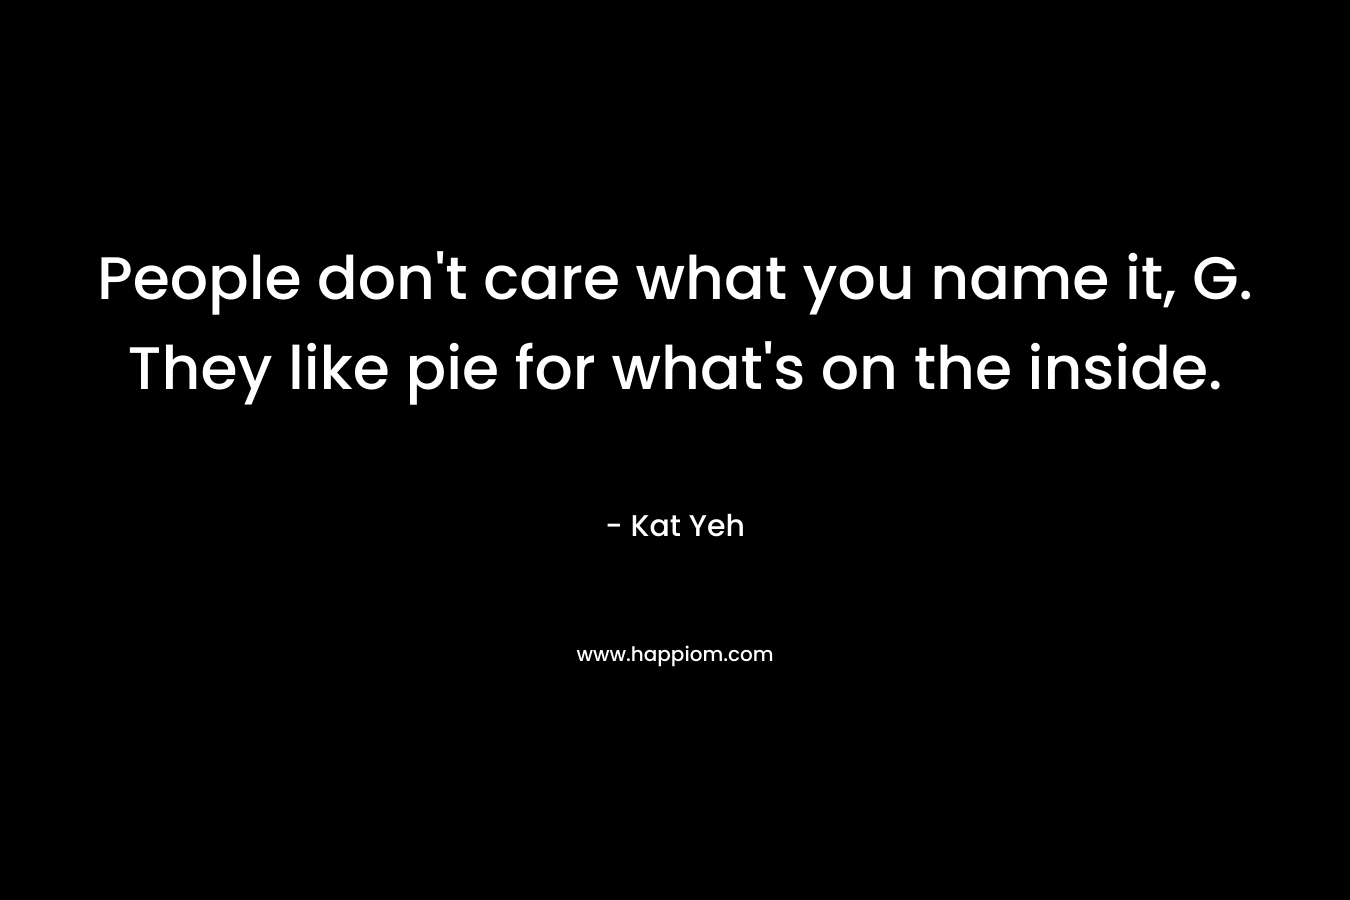 People don’t care what you name it, G. They like pie for what’s on the inside. – Kat Yeh